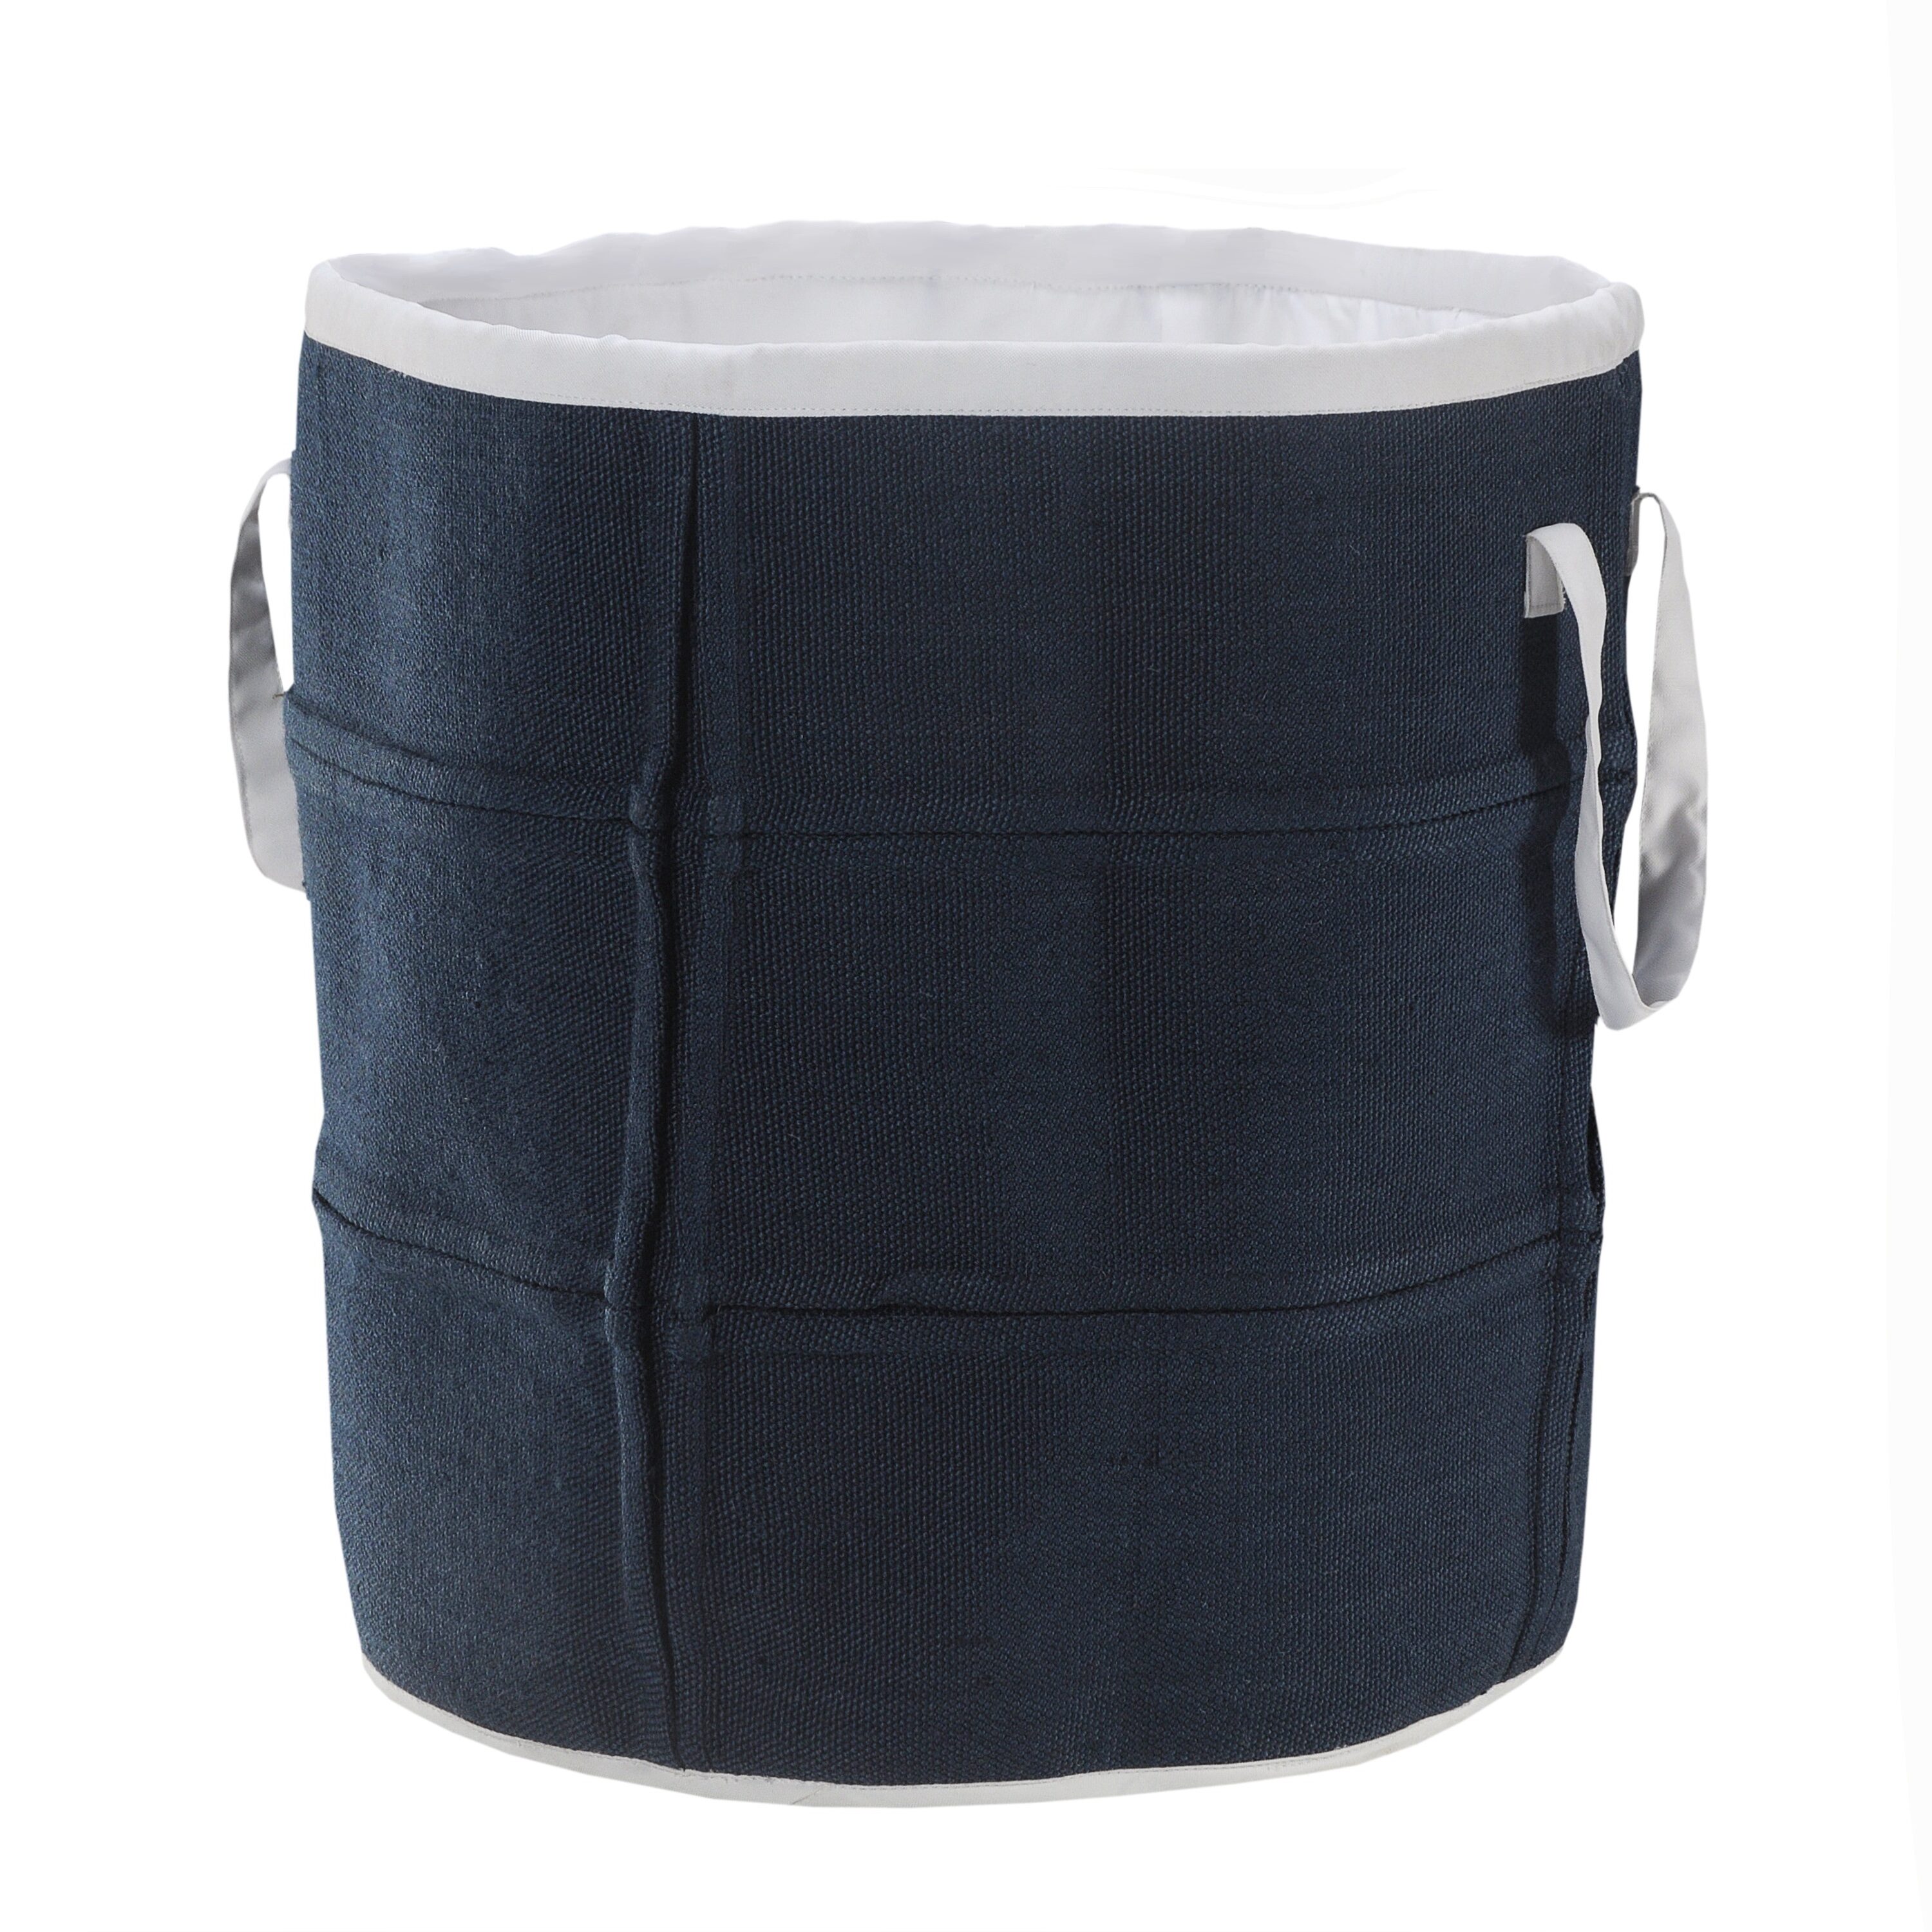 21 Inch Wide Baskets & Storage Containers at